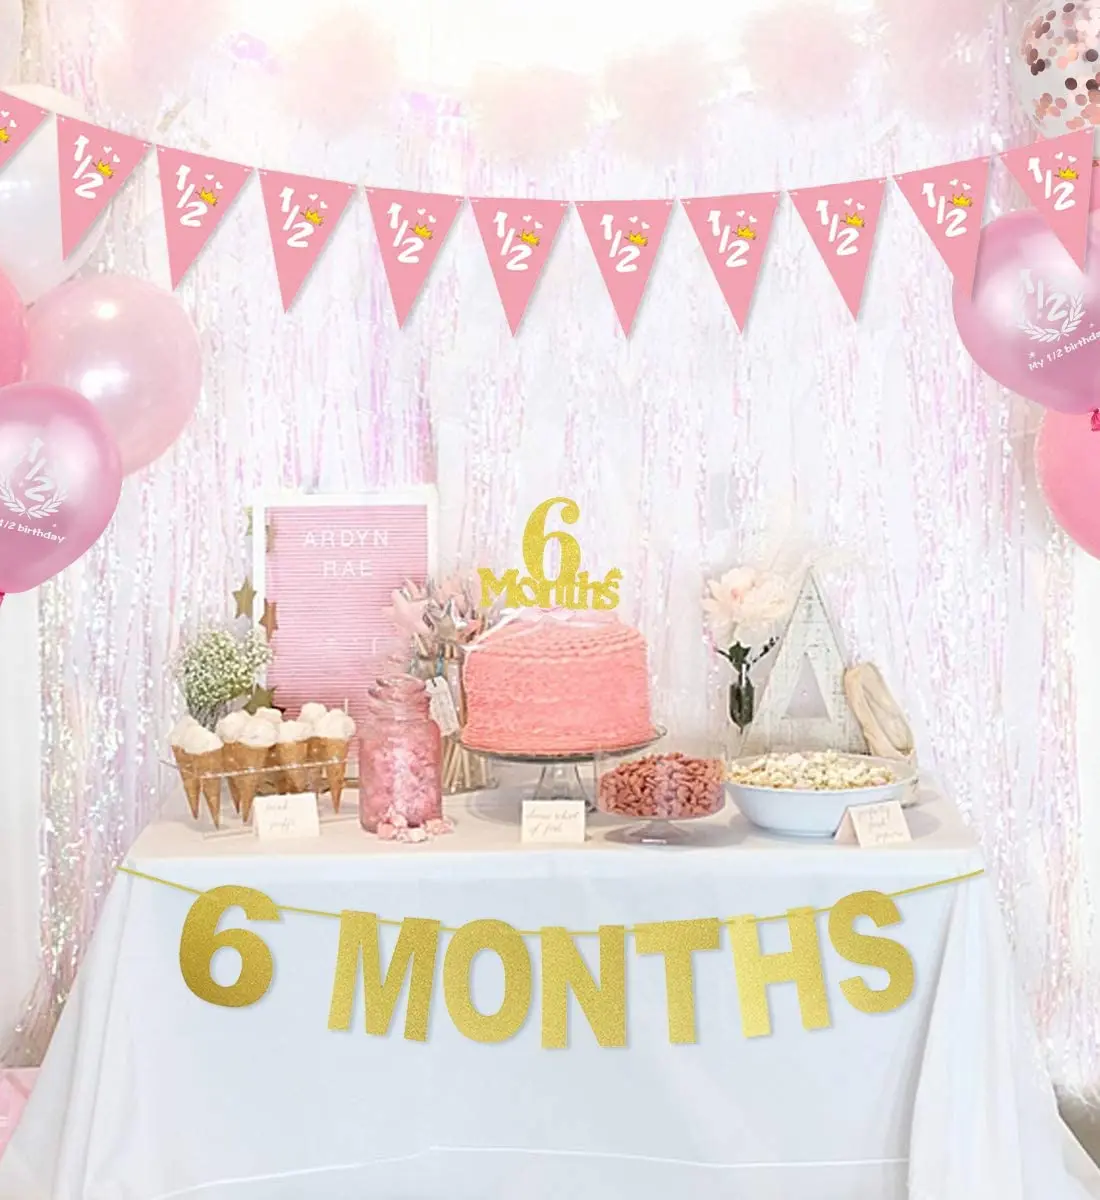 188 Months Birthday Party Decorations Balloon Set for Girls Gold Half Year  Banner Cake Topper Pink 18/18 Pennant Party Supplies